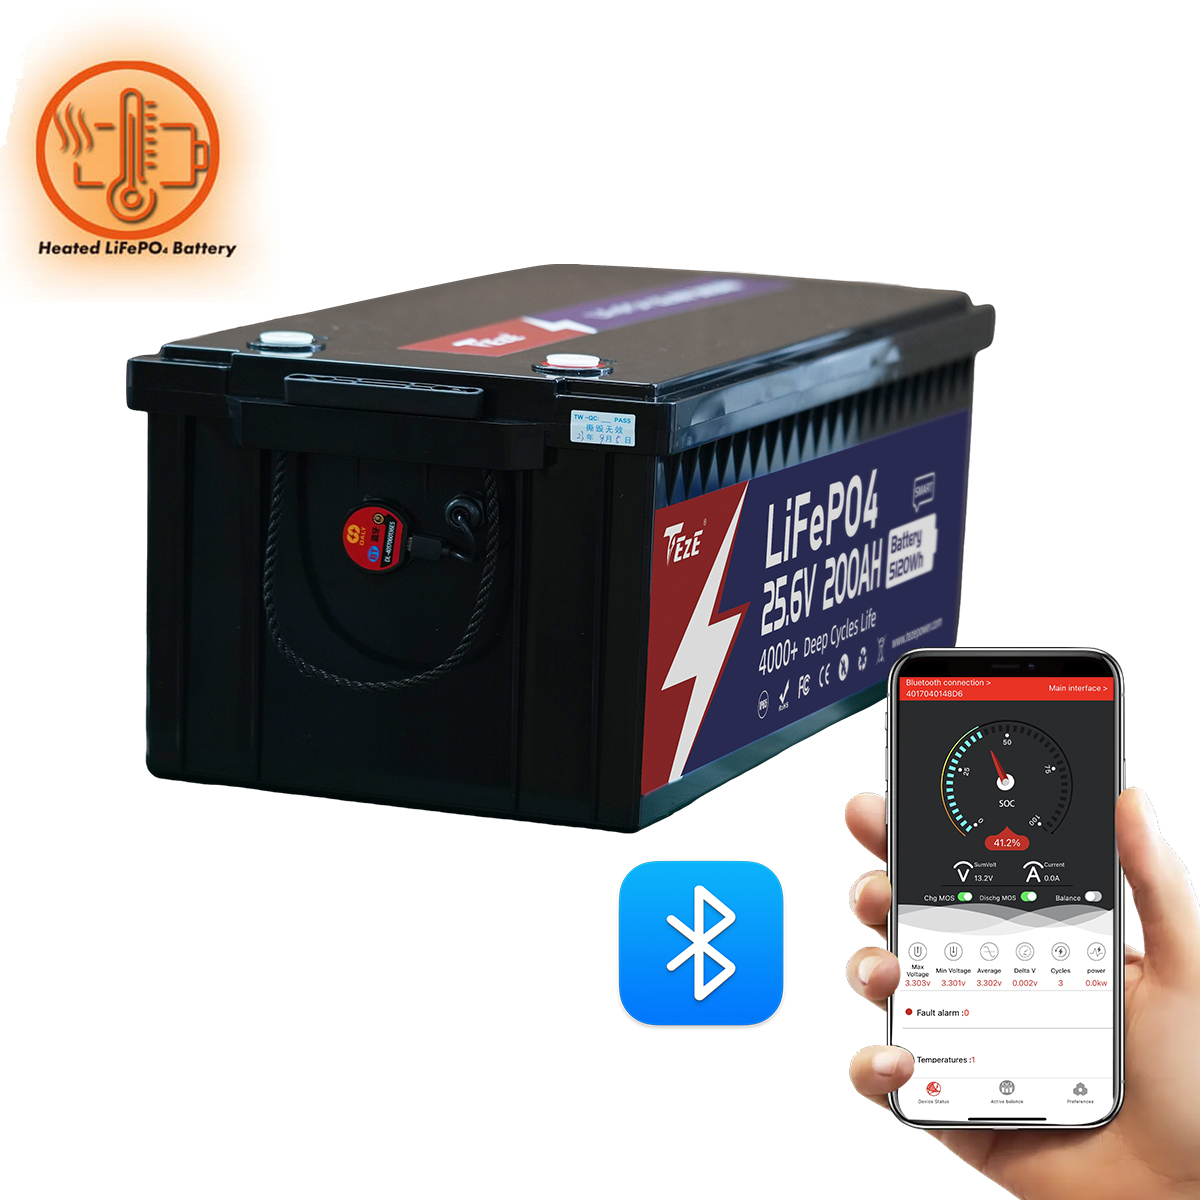 NEW-TezePower 24V200Ah LiFePO4 Battery with Bluetooth, Self-heating and Active Balancer, Built-in 200A Daly BMS (Bluetooth External Version)